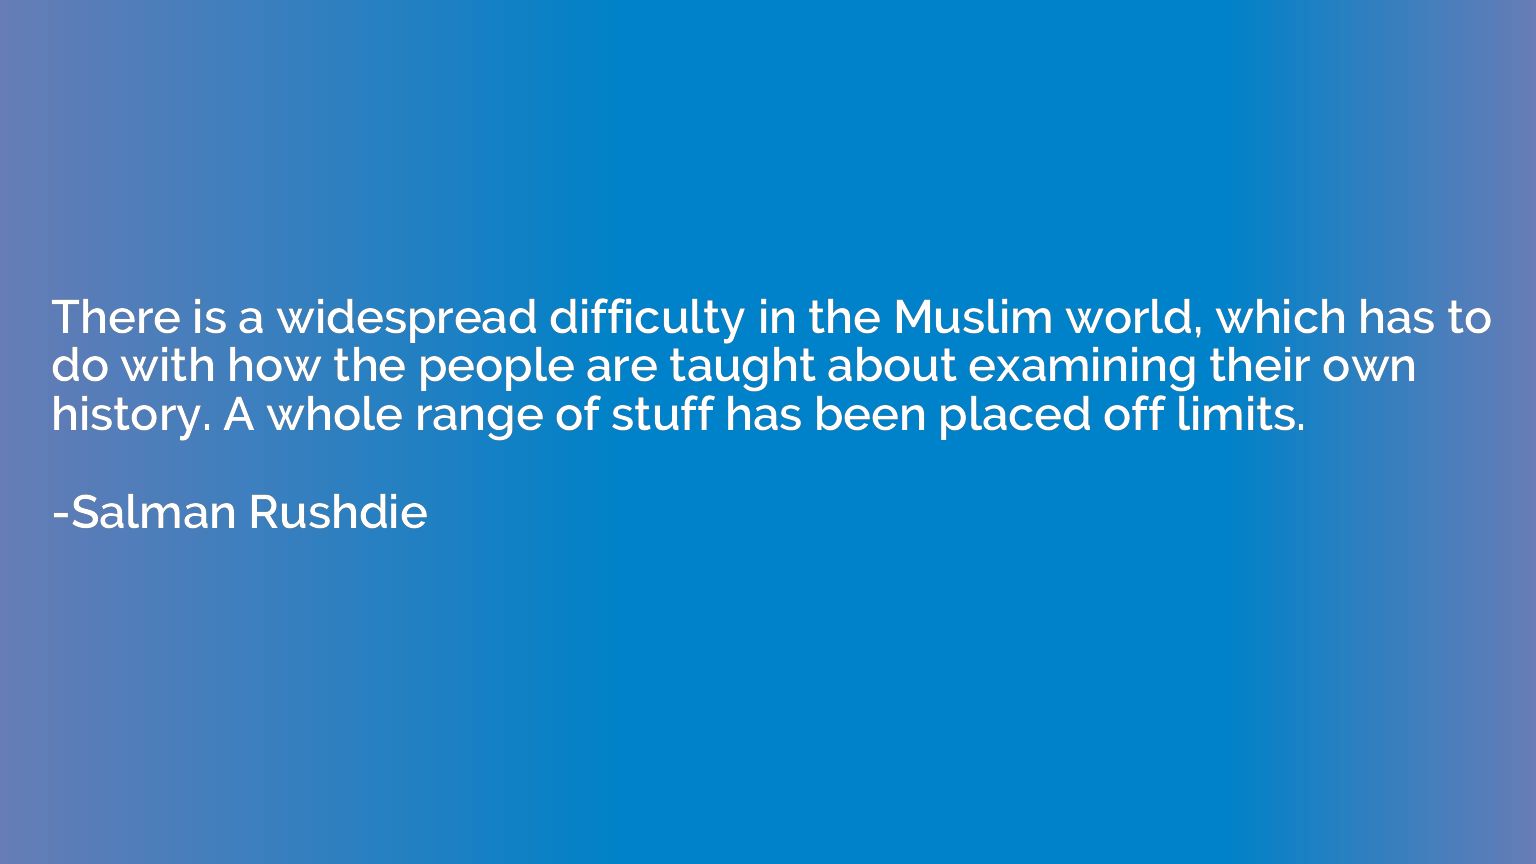 There is a widespread difficulty in the Muslim world, which 